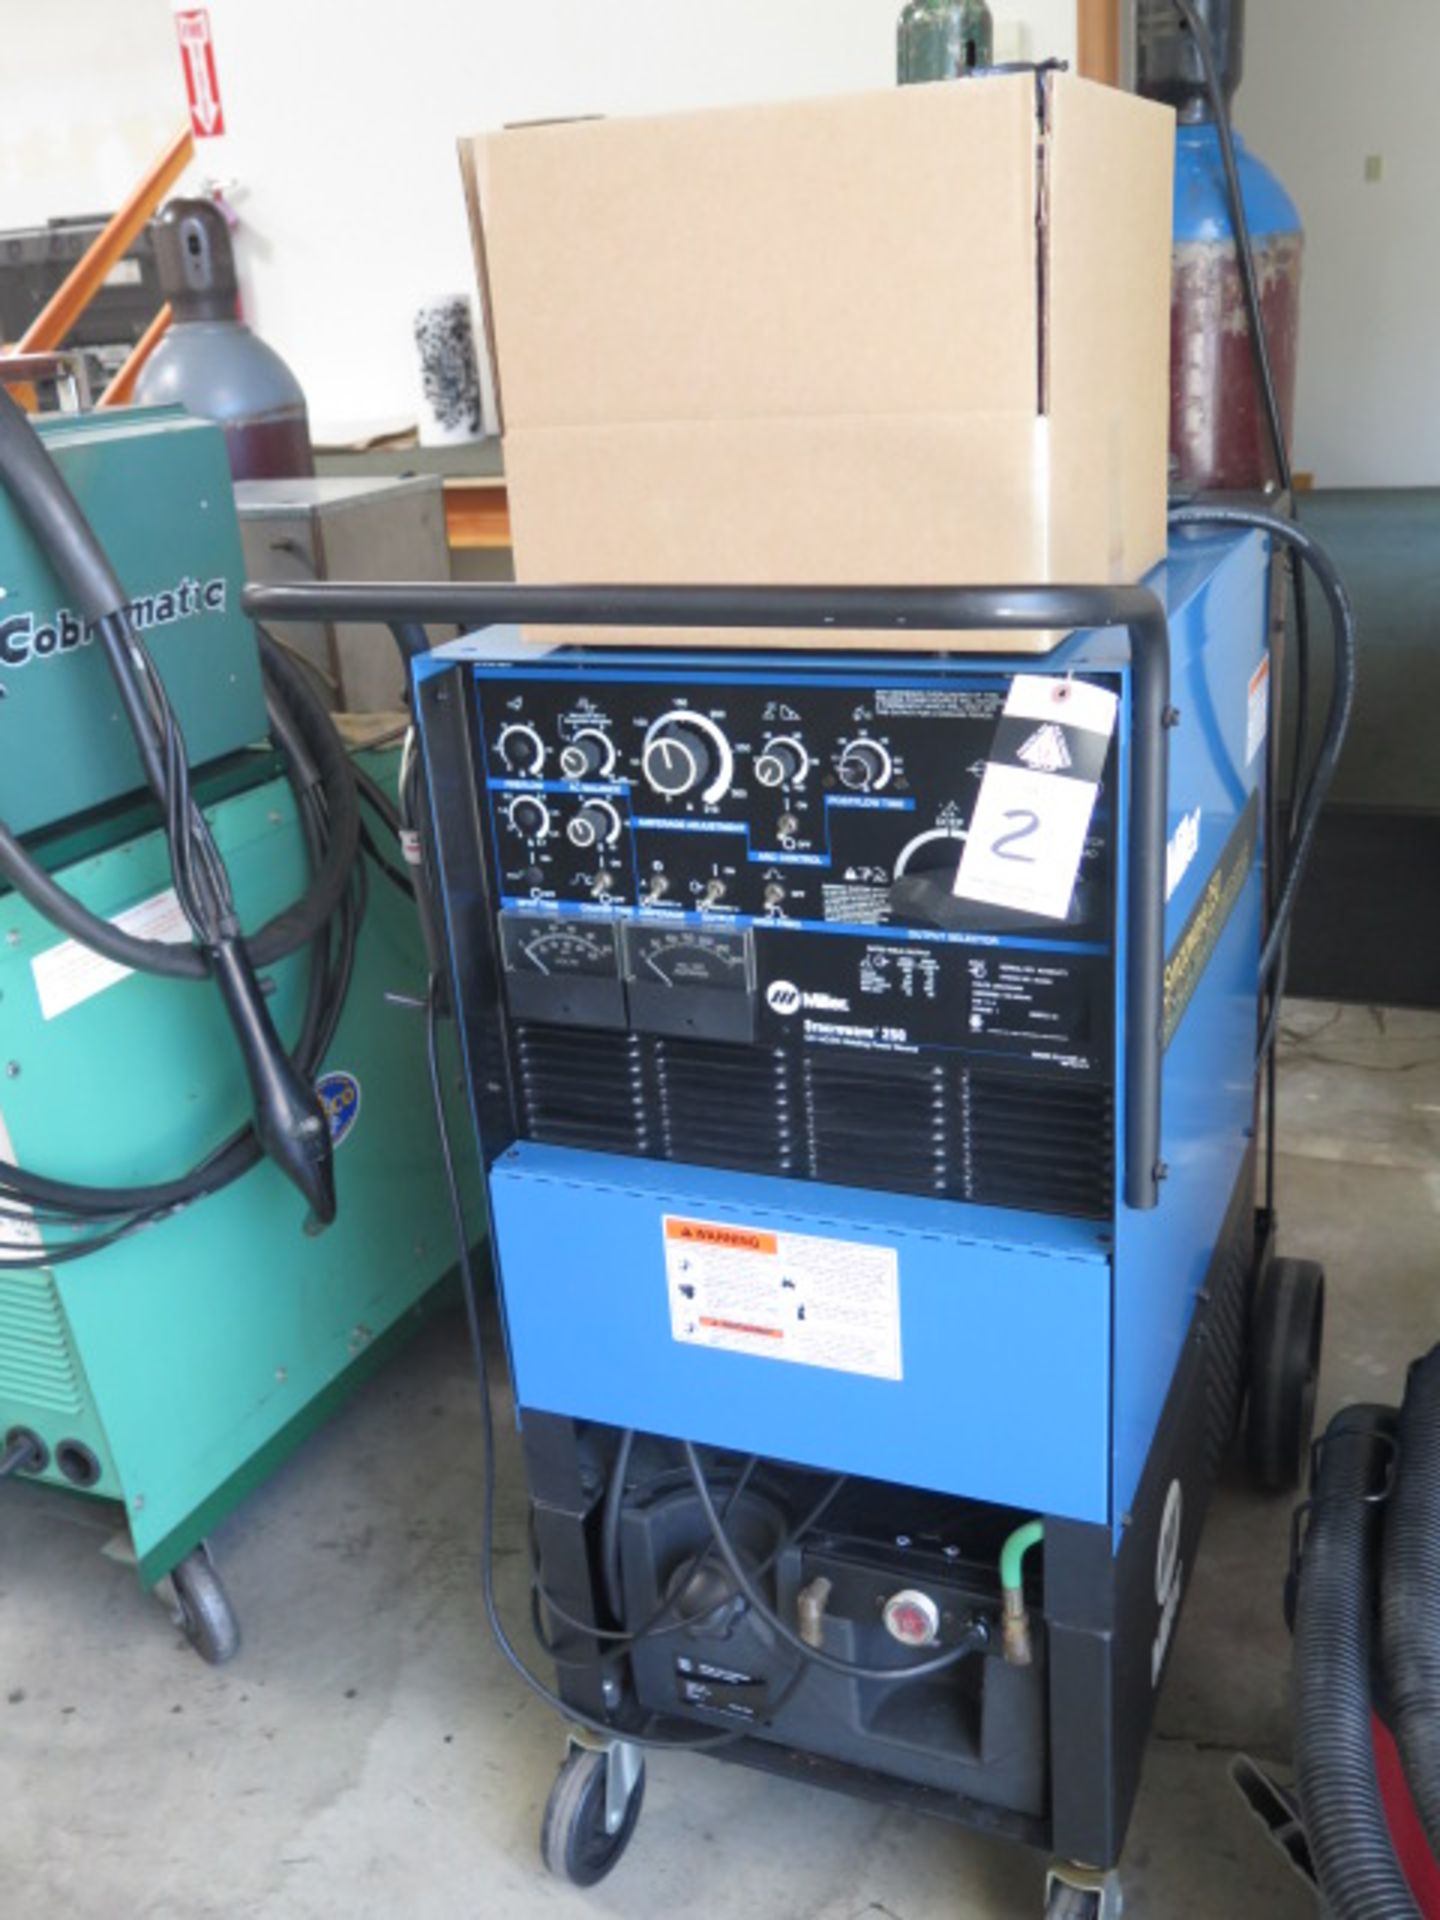 Miller Syncrowave 250 CC-AC/DC Arc Welding Power Source s/n KH483472 w/ Cooler Cart, Tanks and